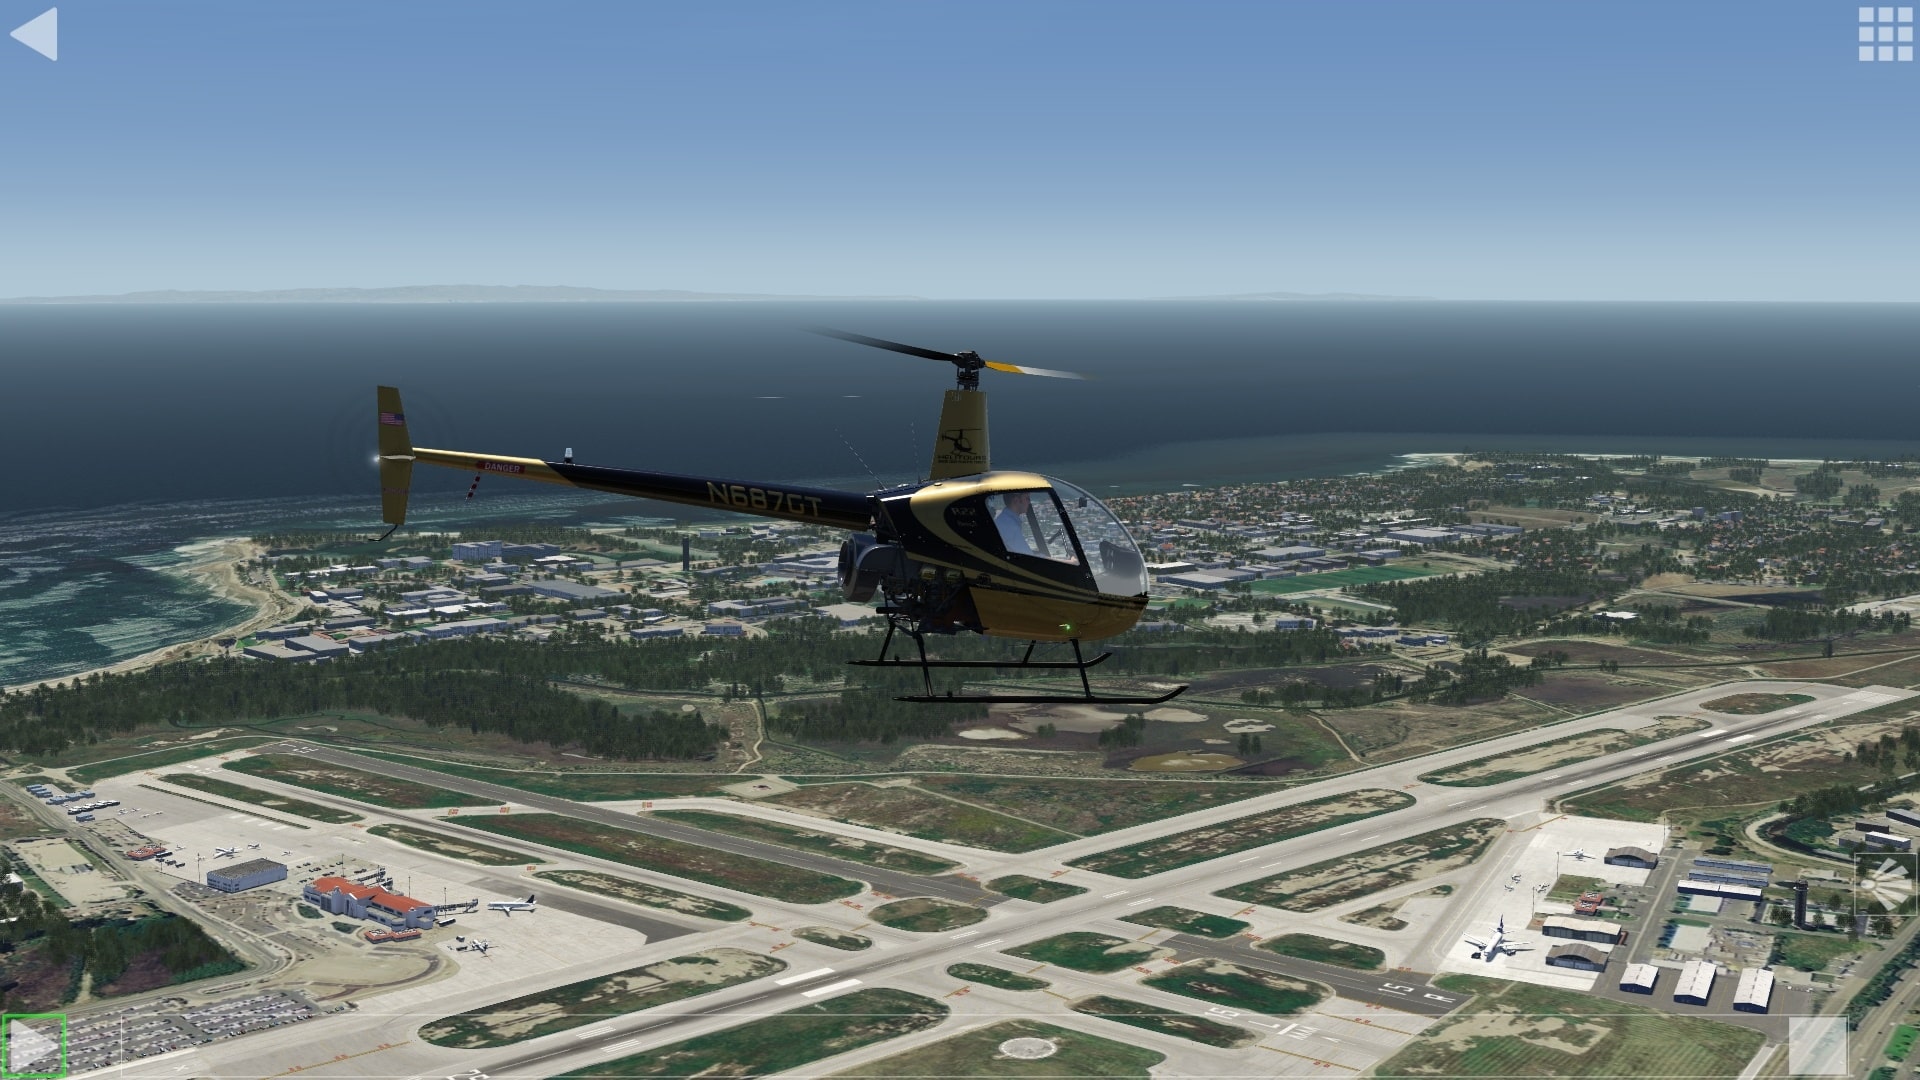 (Replay of my very first simulated helicopter flight since PlayStation 1 days. I''m still proud. The flight model of the Aerofly FS version of the Robinson R22 is also used in Switzerland in an EASA certified Flight Simulation Training Device)